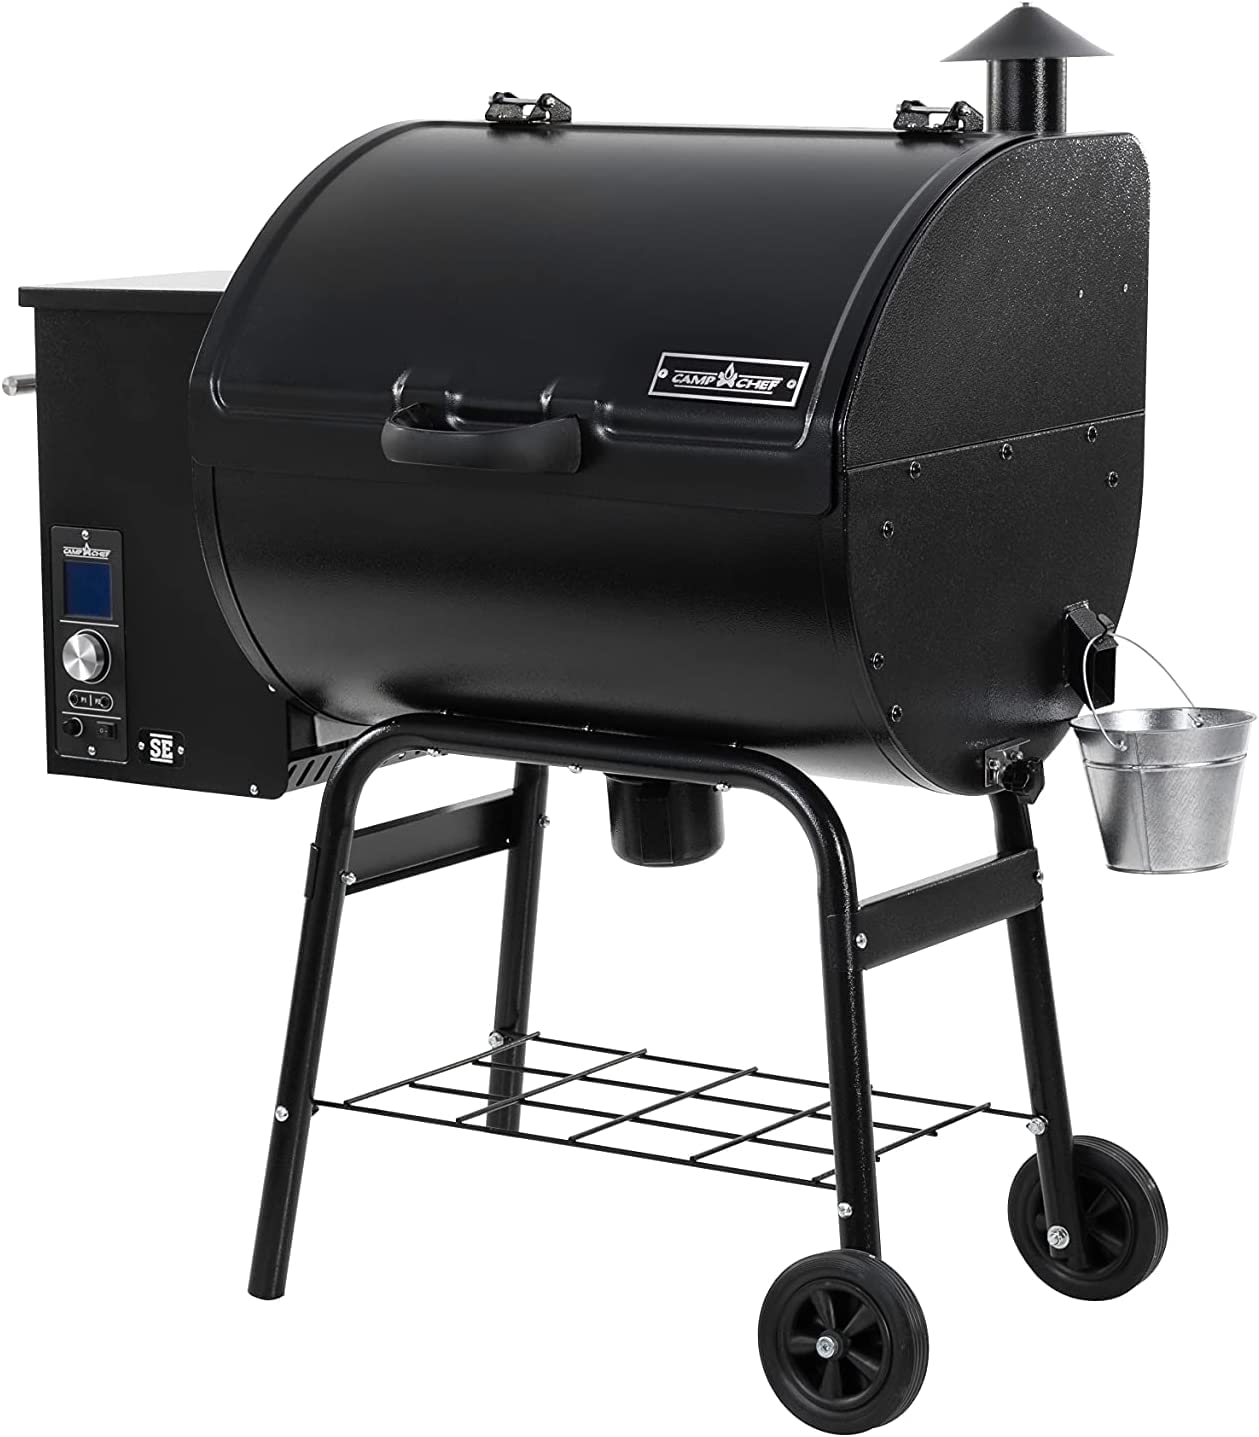 Camp Chef SmokePro SE Pellet Grill - image 3 of 8